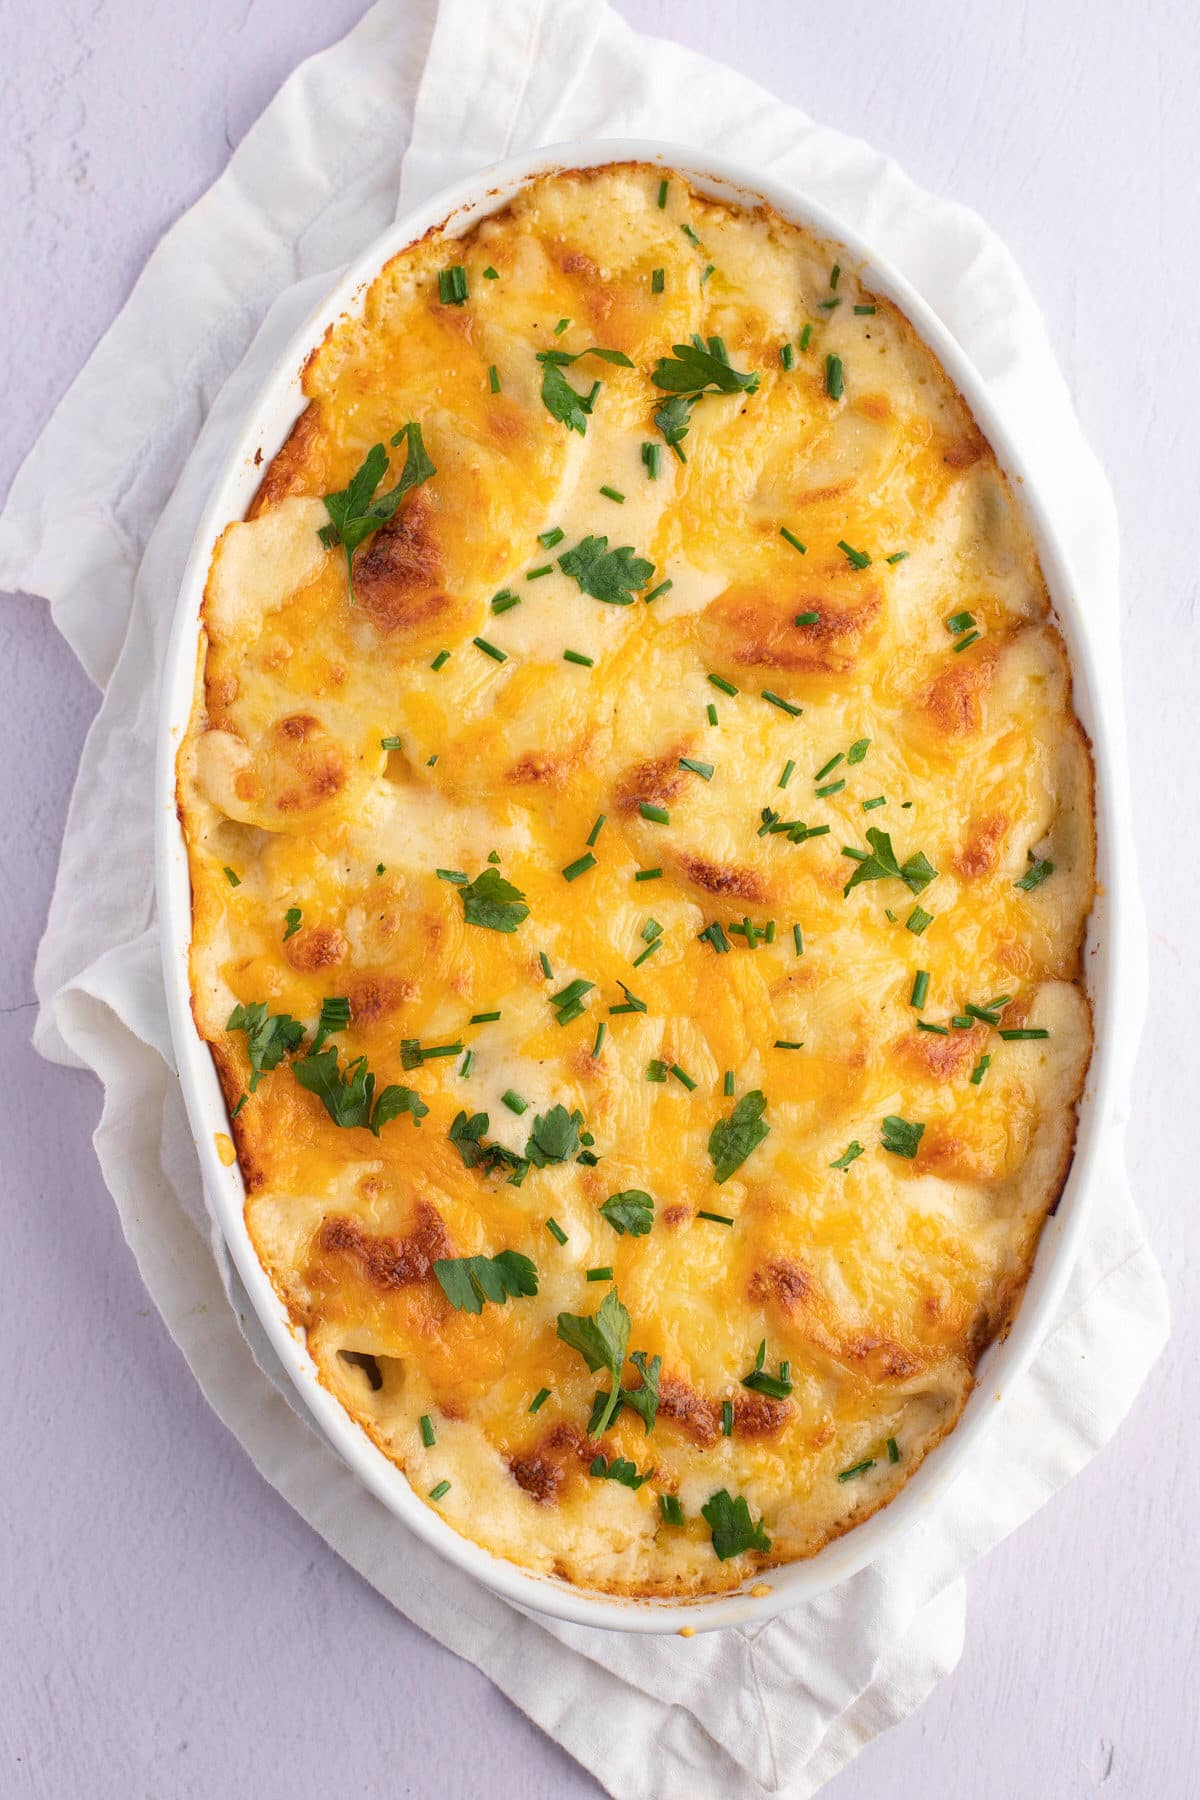 Baked scalloped potatoes in a white dish.